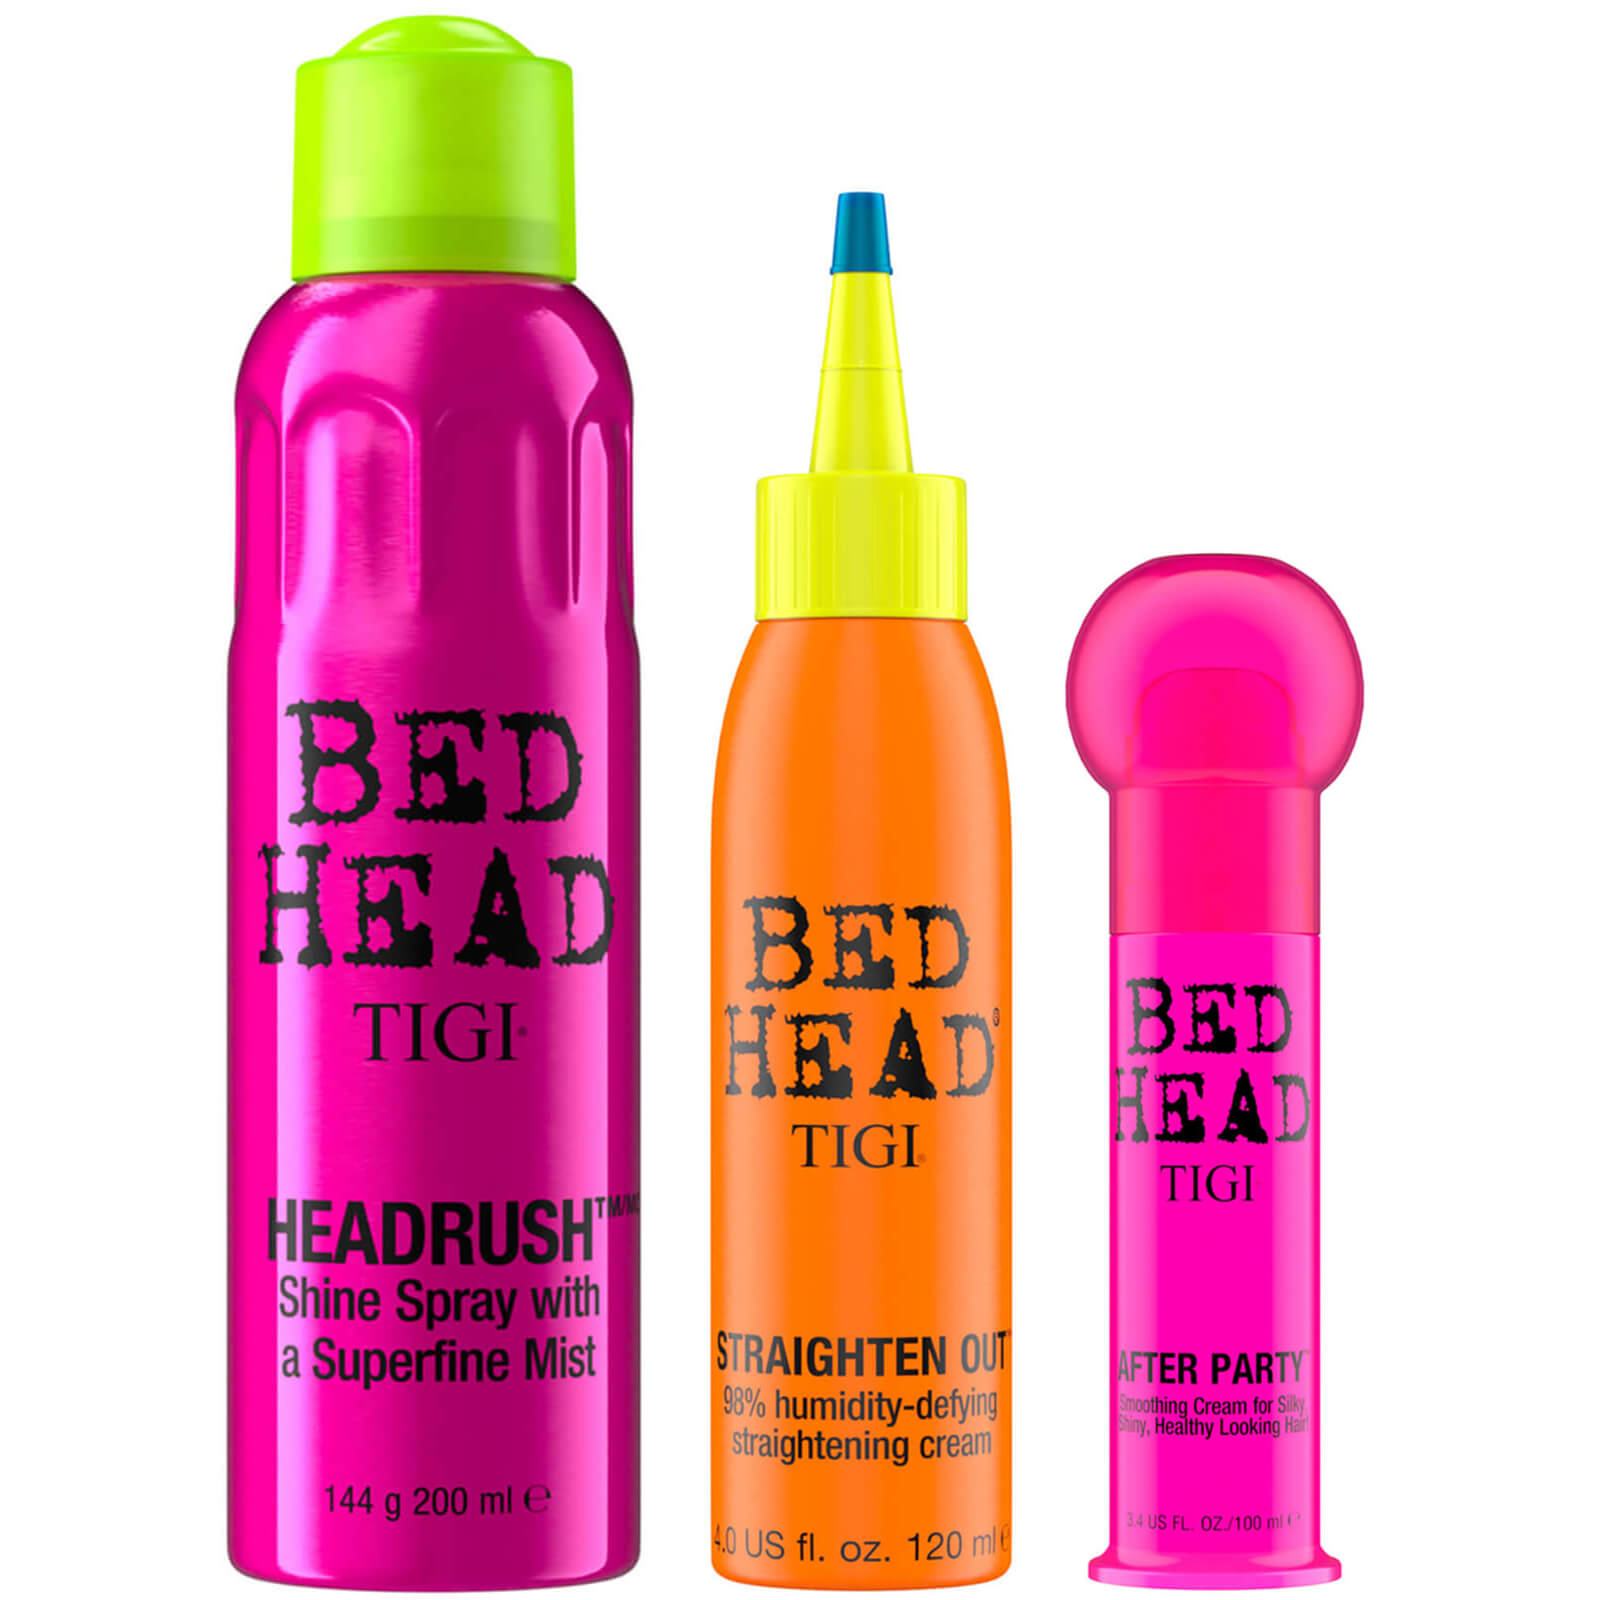 TIGI Bed Head Hair Styling Set for Shiny, Smooth and Silky Hair